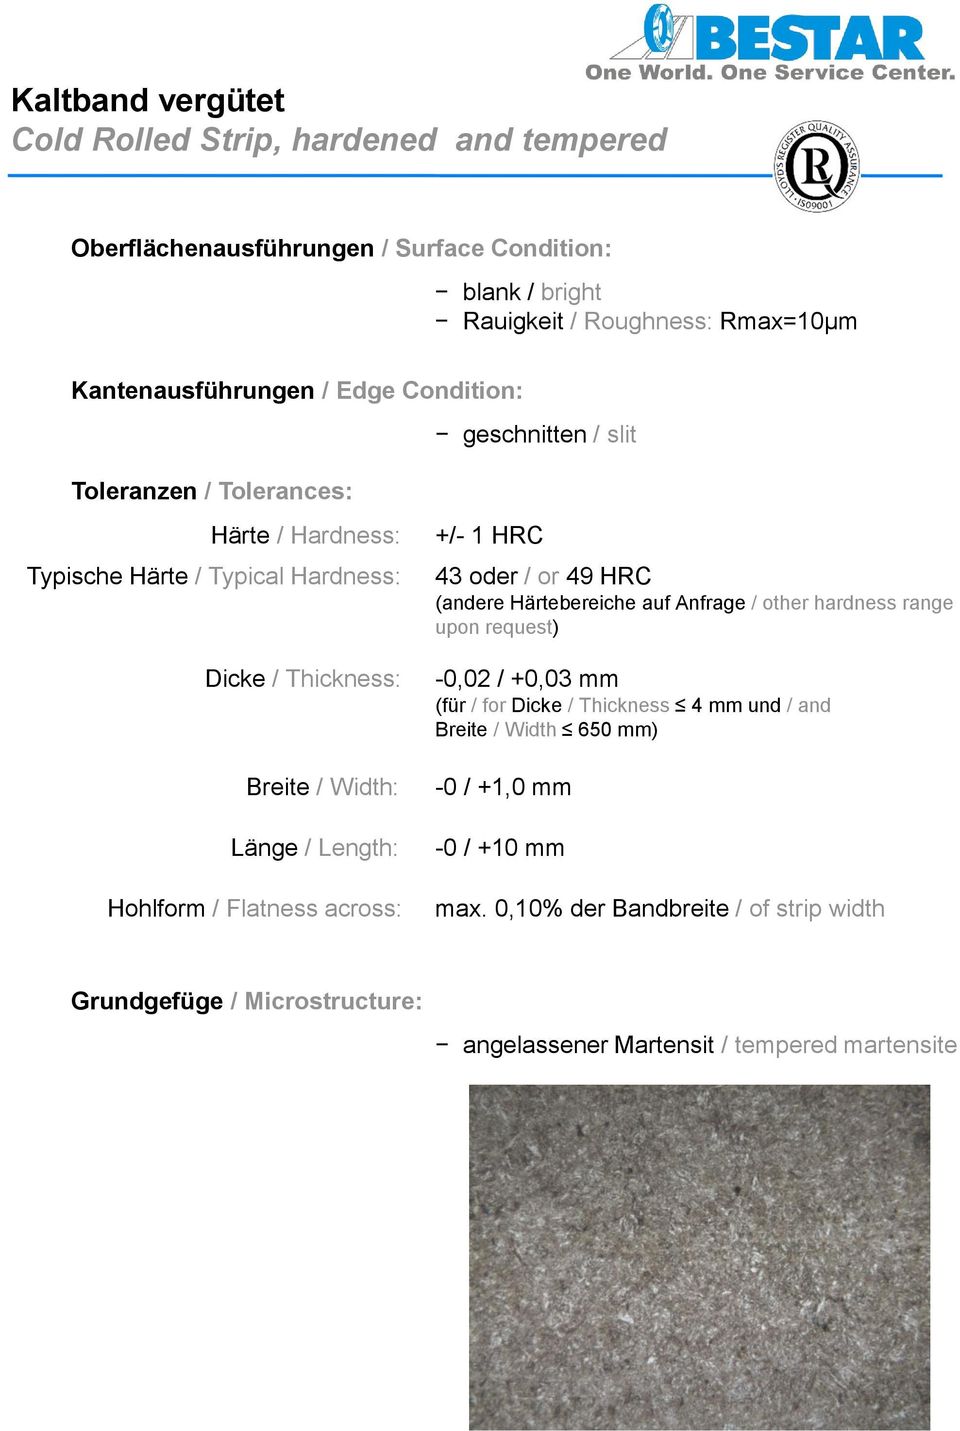 / Flatness across: +/- 1 HRC 43 oder / or 49 HRC (andere Härtebereiche auf Anfrage / other hardness range upon request) -0,02 / +0,03 mm (für / for Dicke / Thickness 4 mm